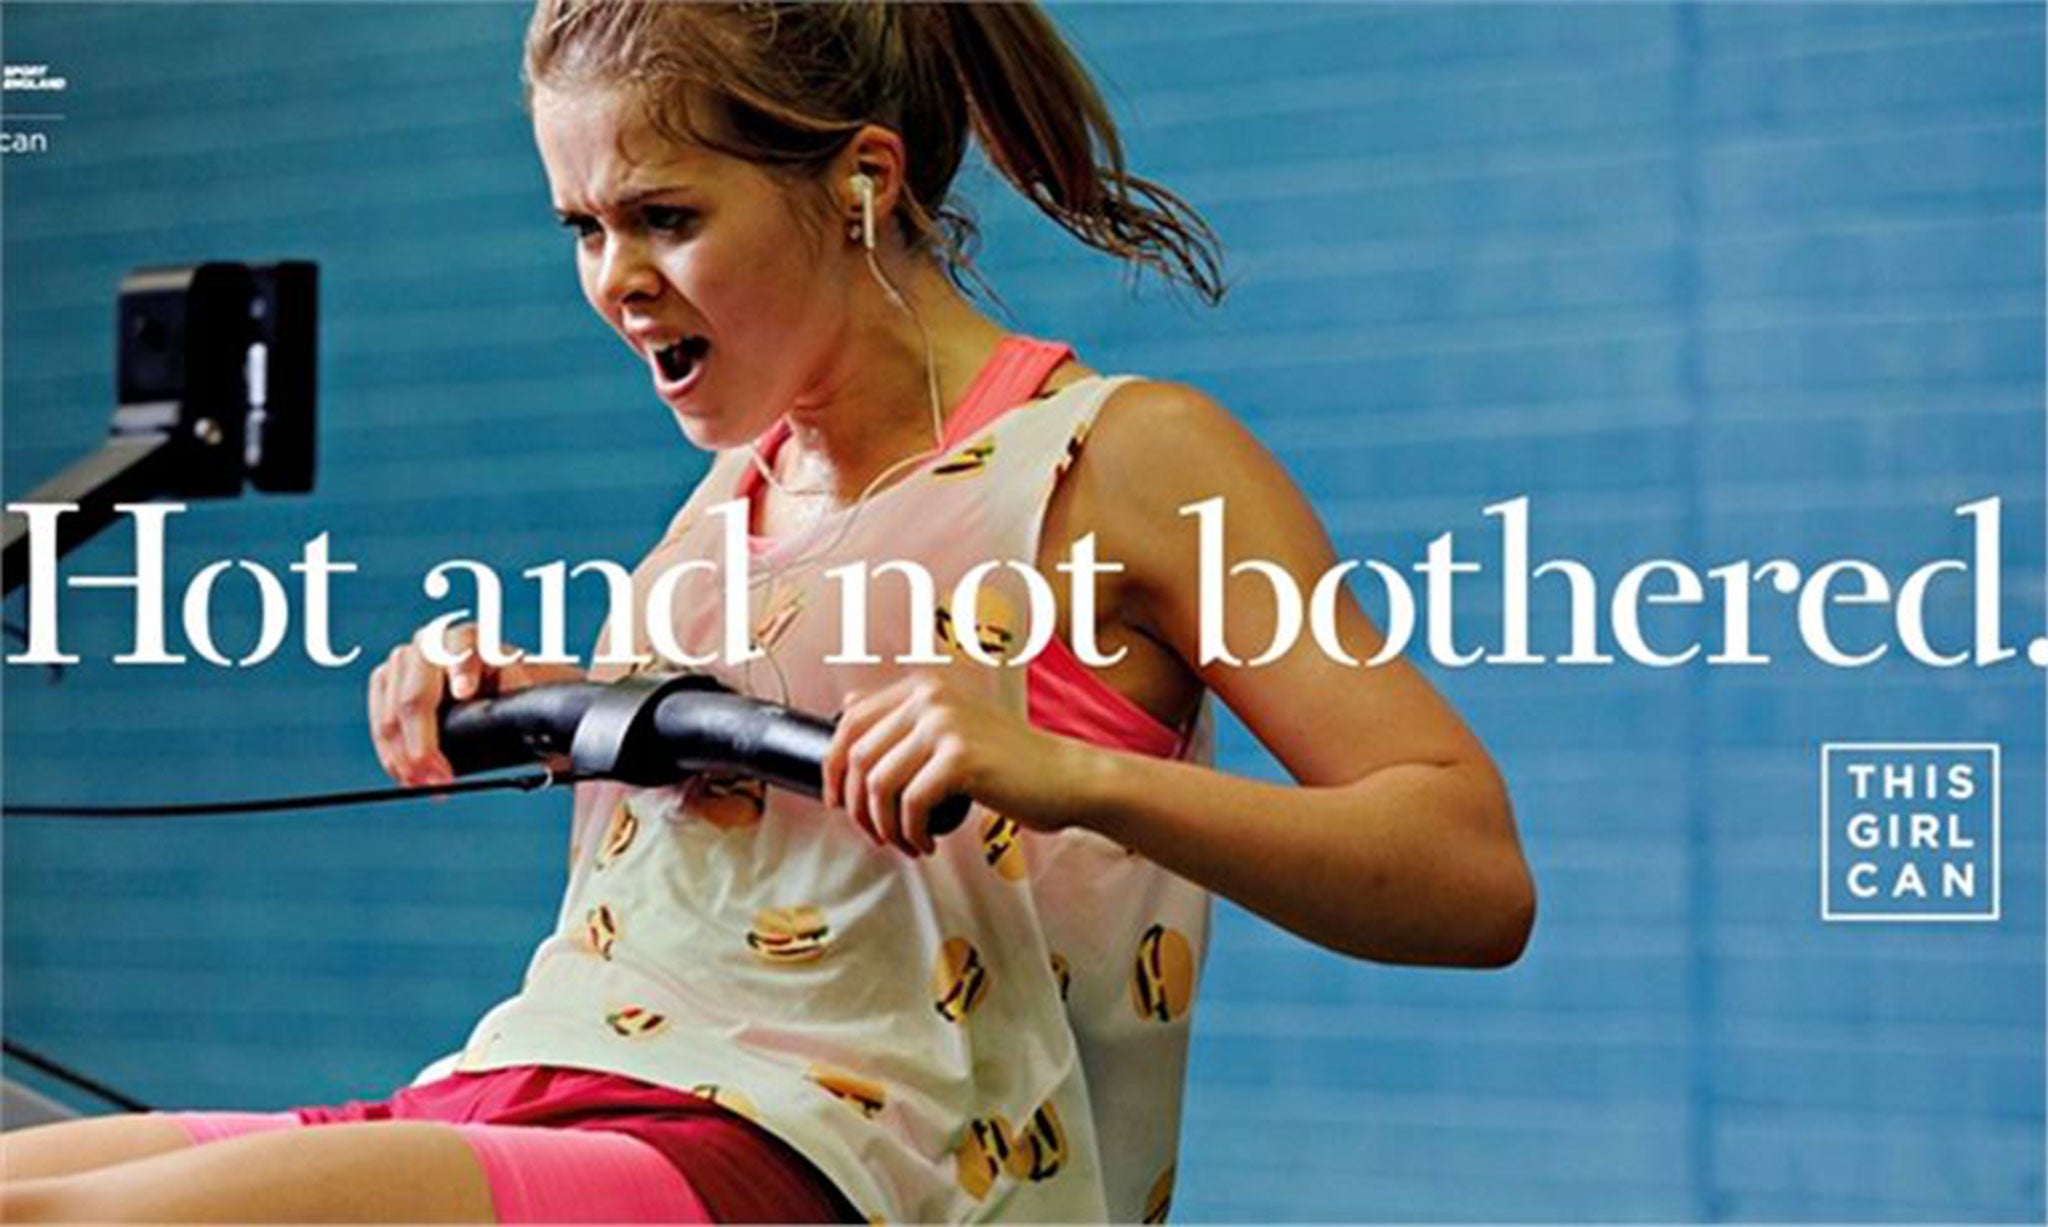 An image from the This Girl Can campaign